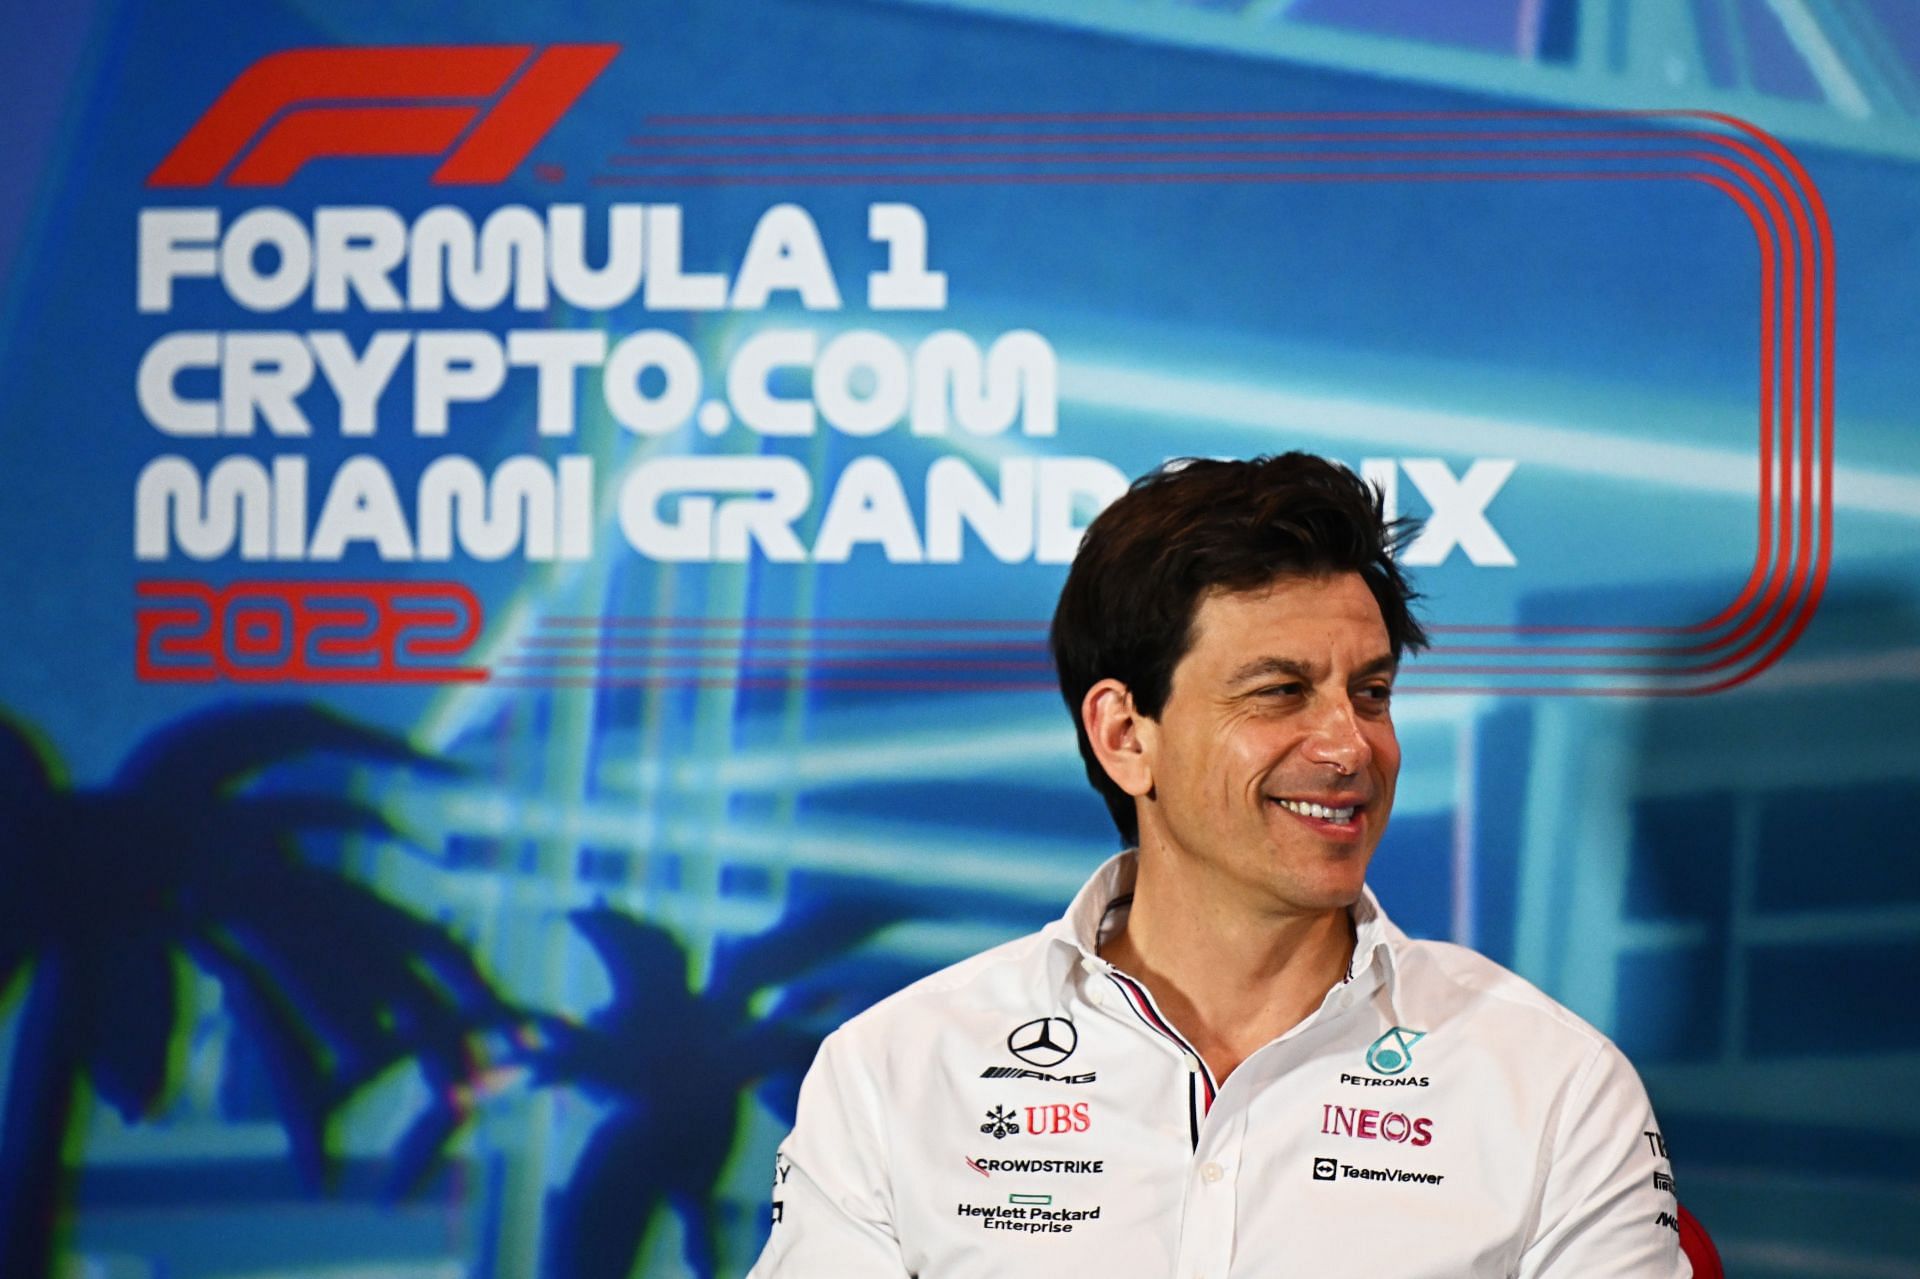 Toto Wolff feels Lewis Hamilton can win more titles with the right cat under him